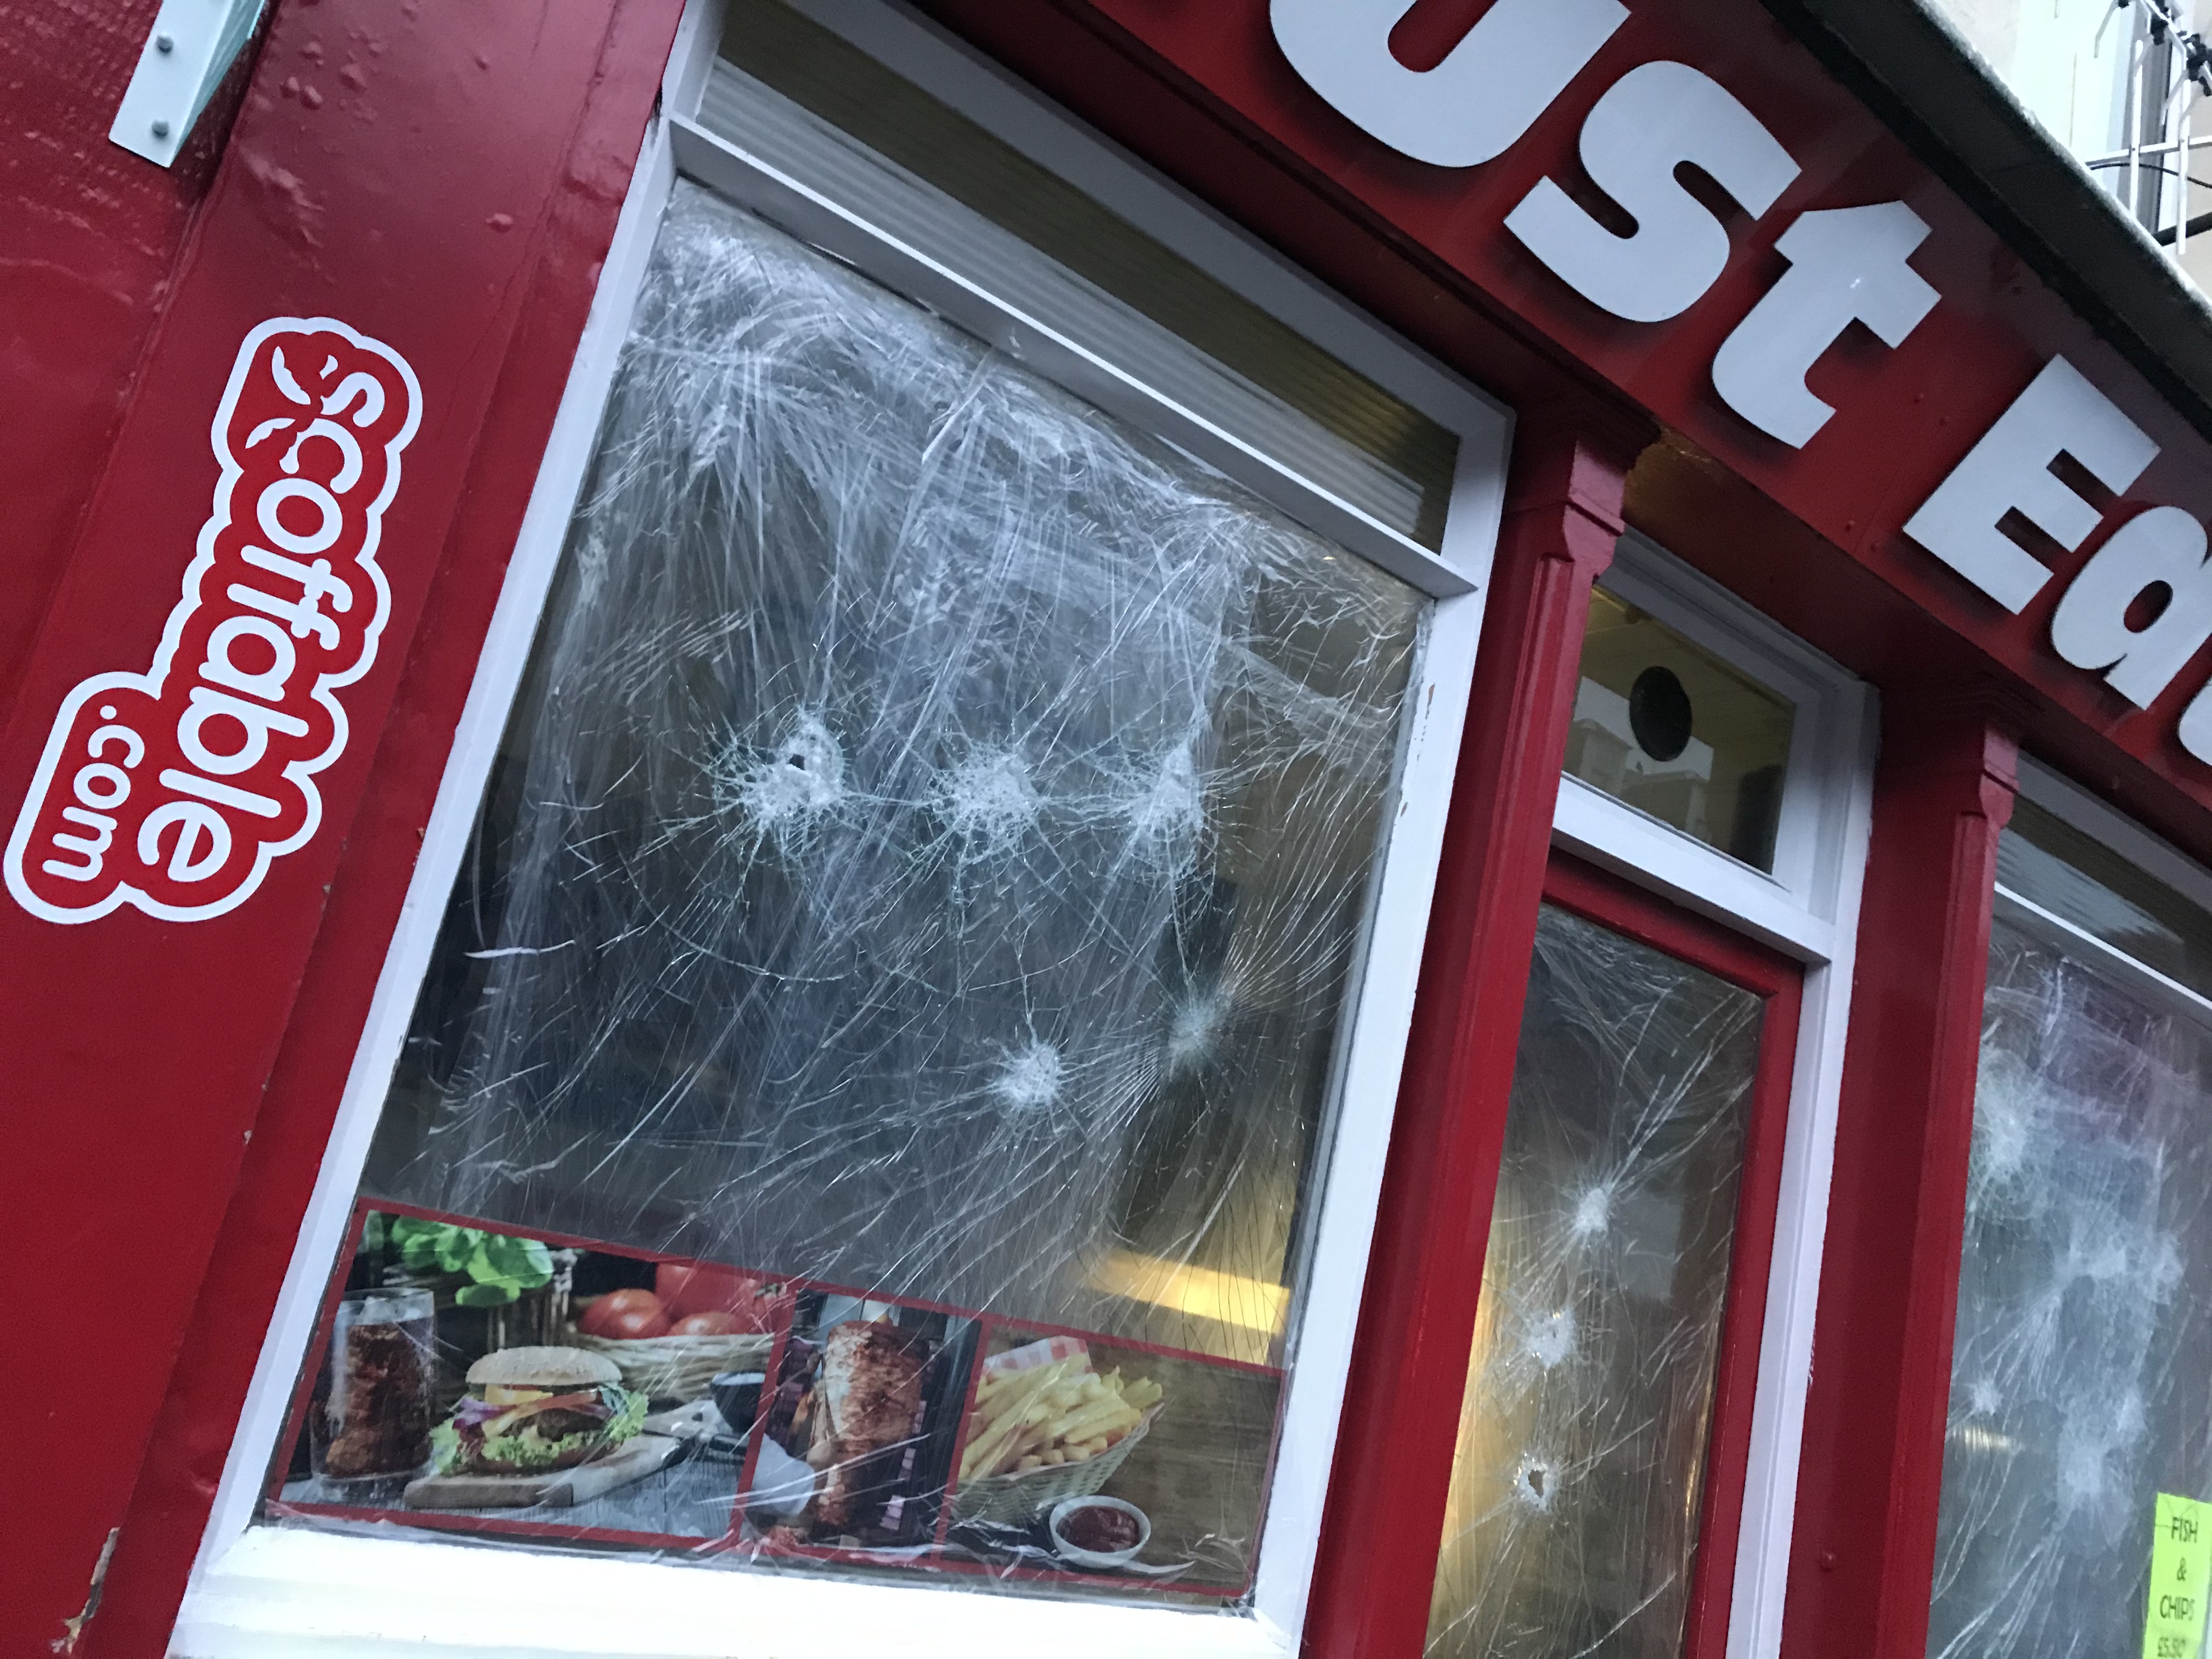 The Must Eat premises in the aftermath of the attack.